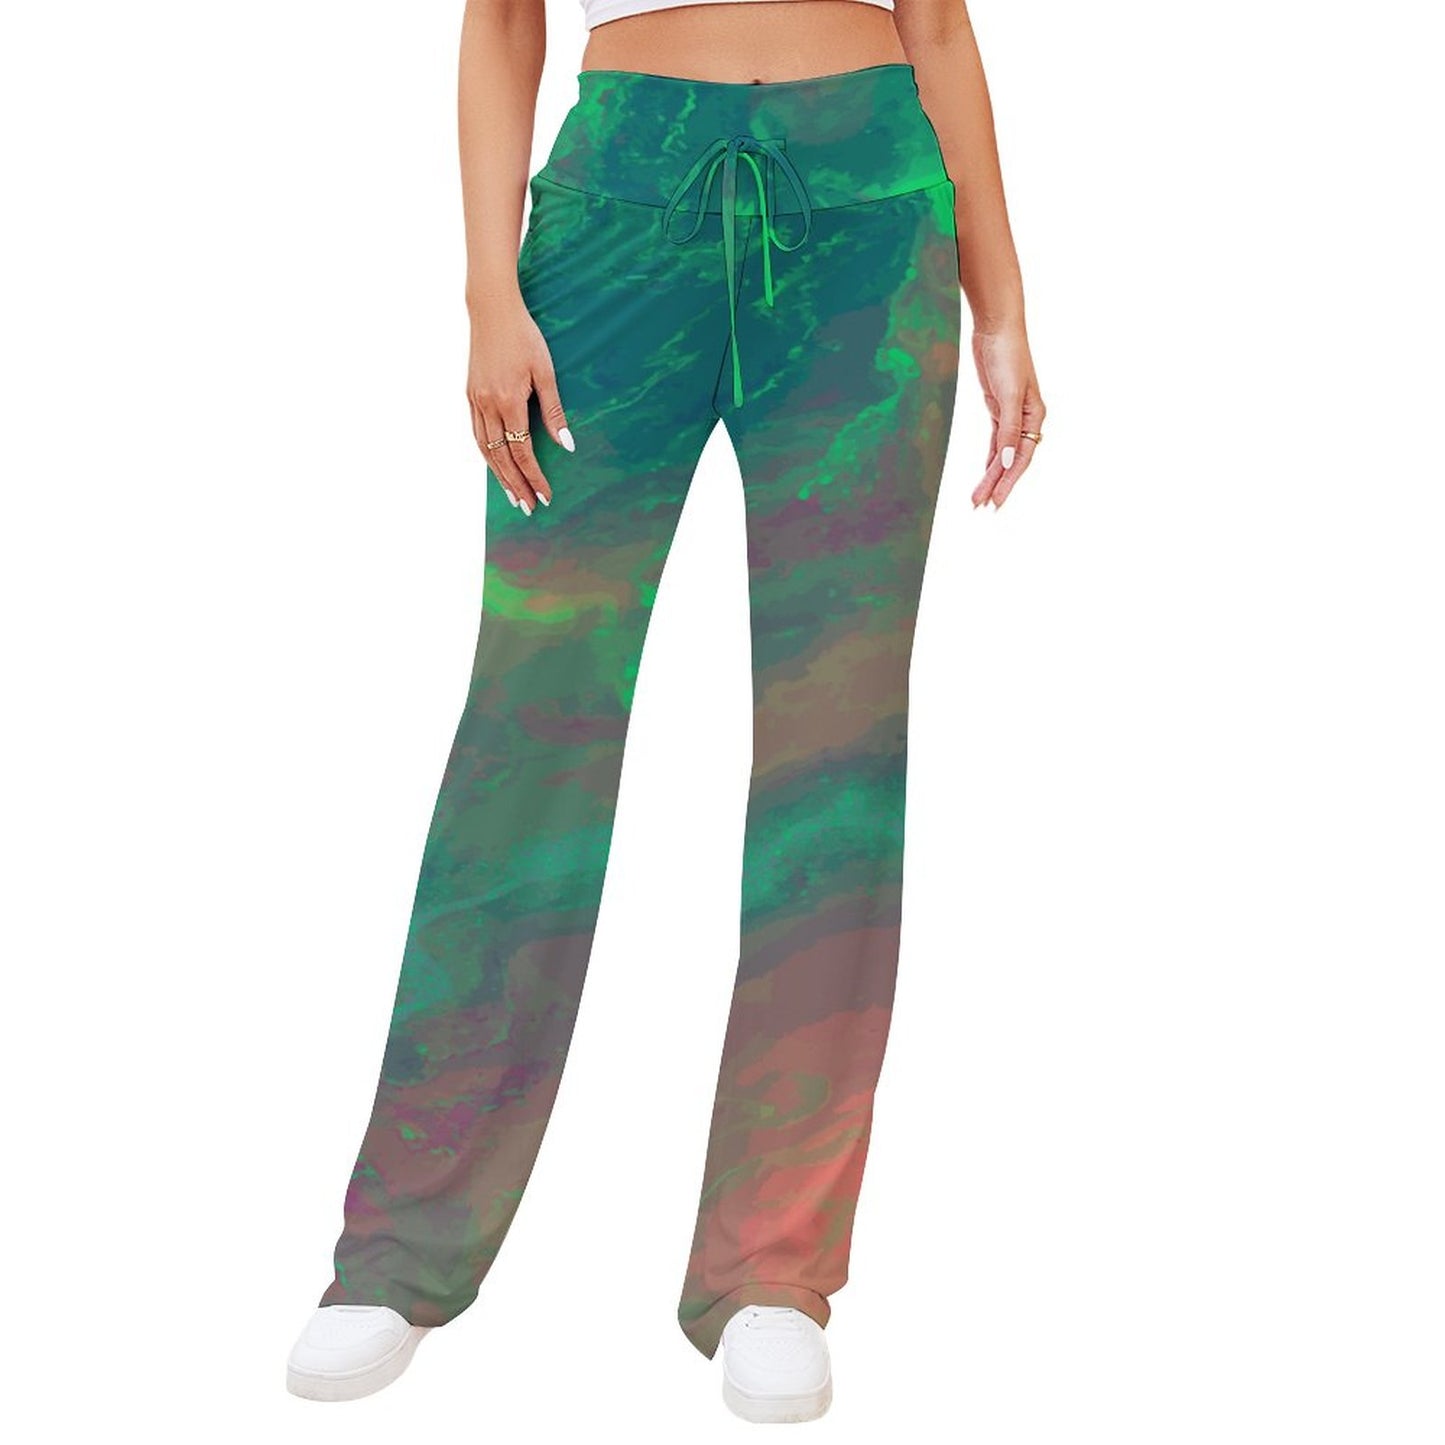 Online Customize Sportswear for Women Straight Lace Up Yoga Pants Green Fluid